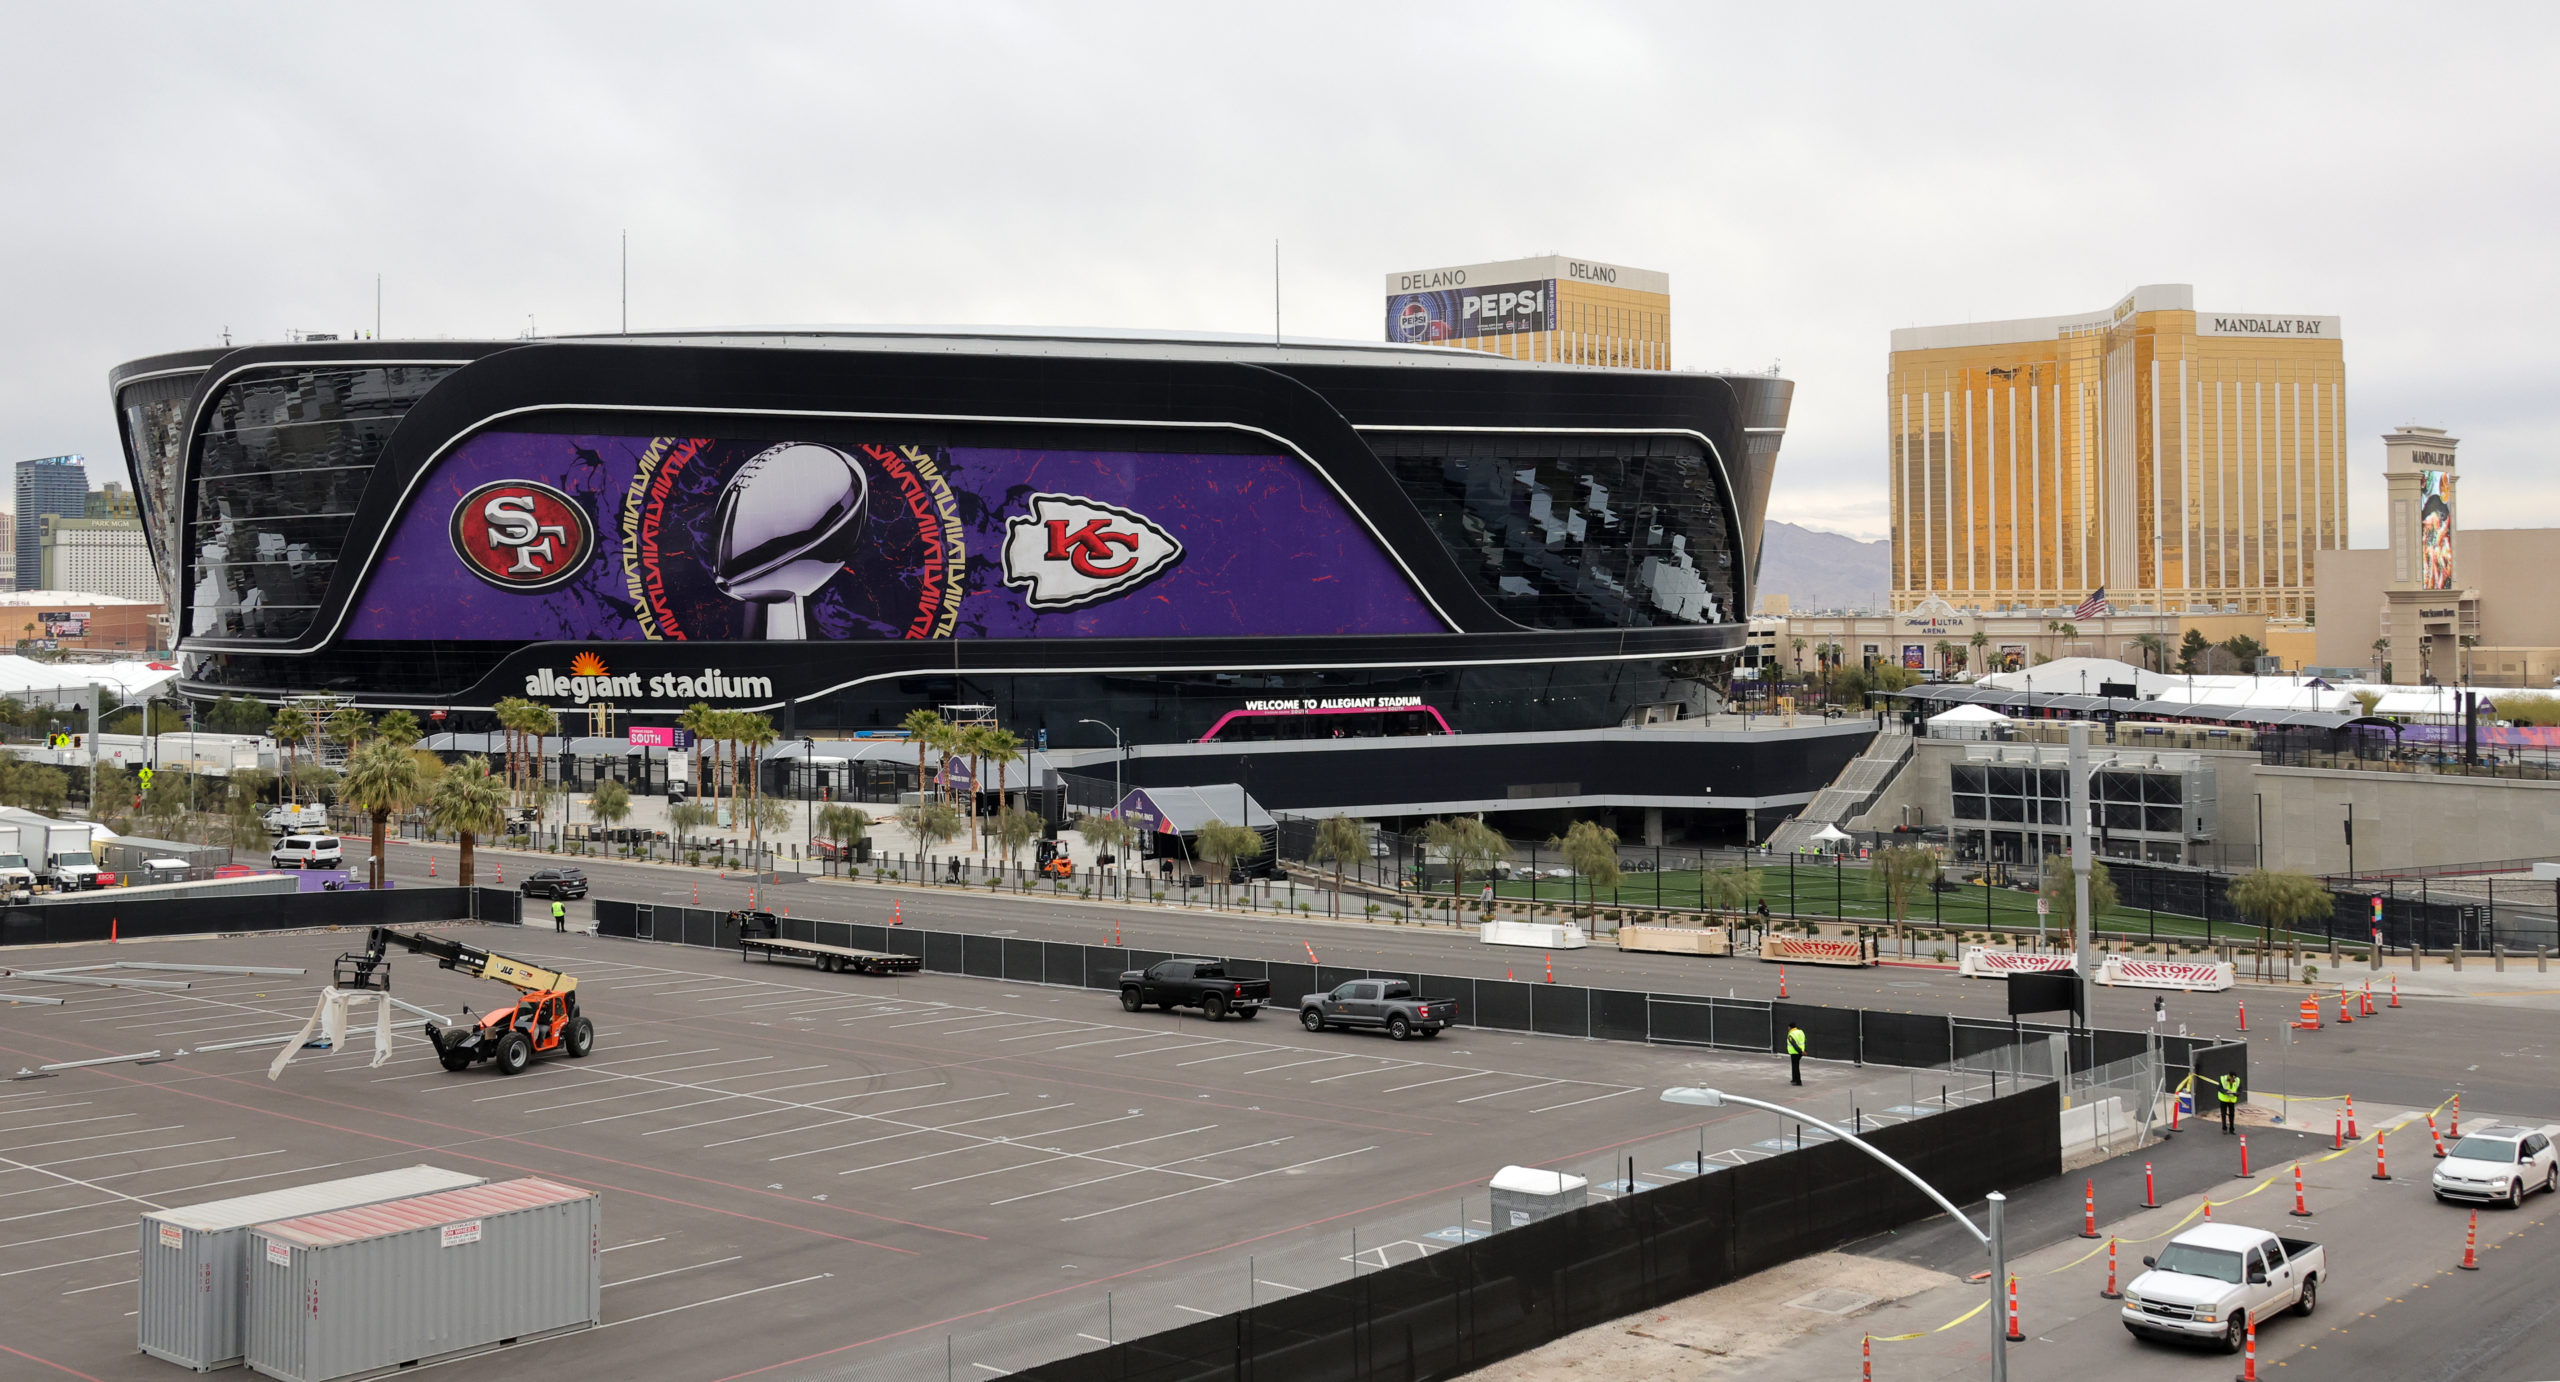 LAS VEGAS, NEVADA - FEBRUARY 01: An exterior view shows an image of the Lombardi Trophy, team logos and signage for Super Bowl LVIII at Allegiant Stadium on February 01, 2024 in Las Vegas, Nevada. The game will be played on February 11, 2024, between the Kansas City Chiefs and the San Francisco 49ers. Ethan Miller/Getty Images